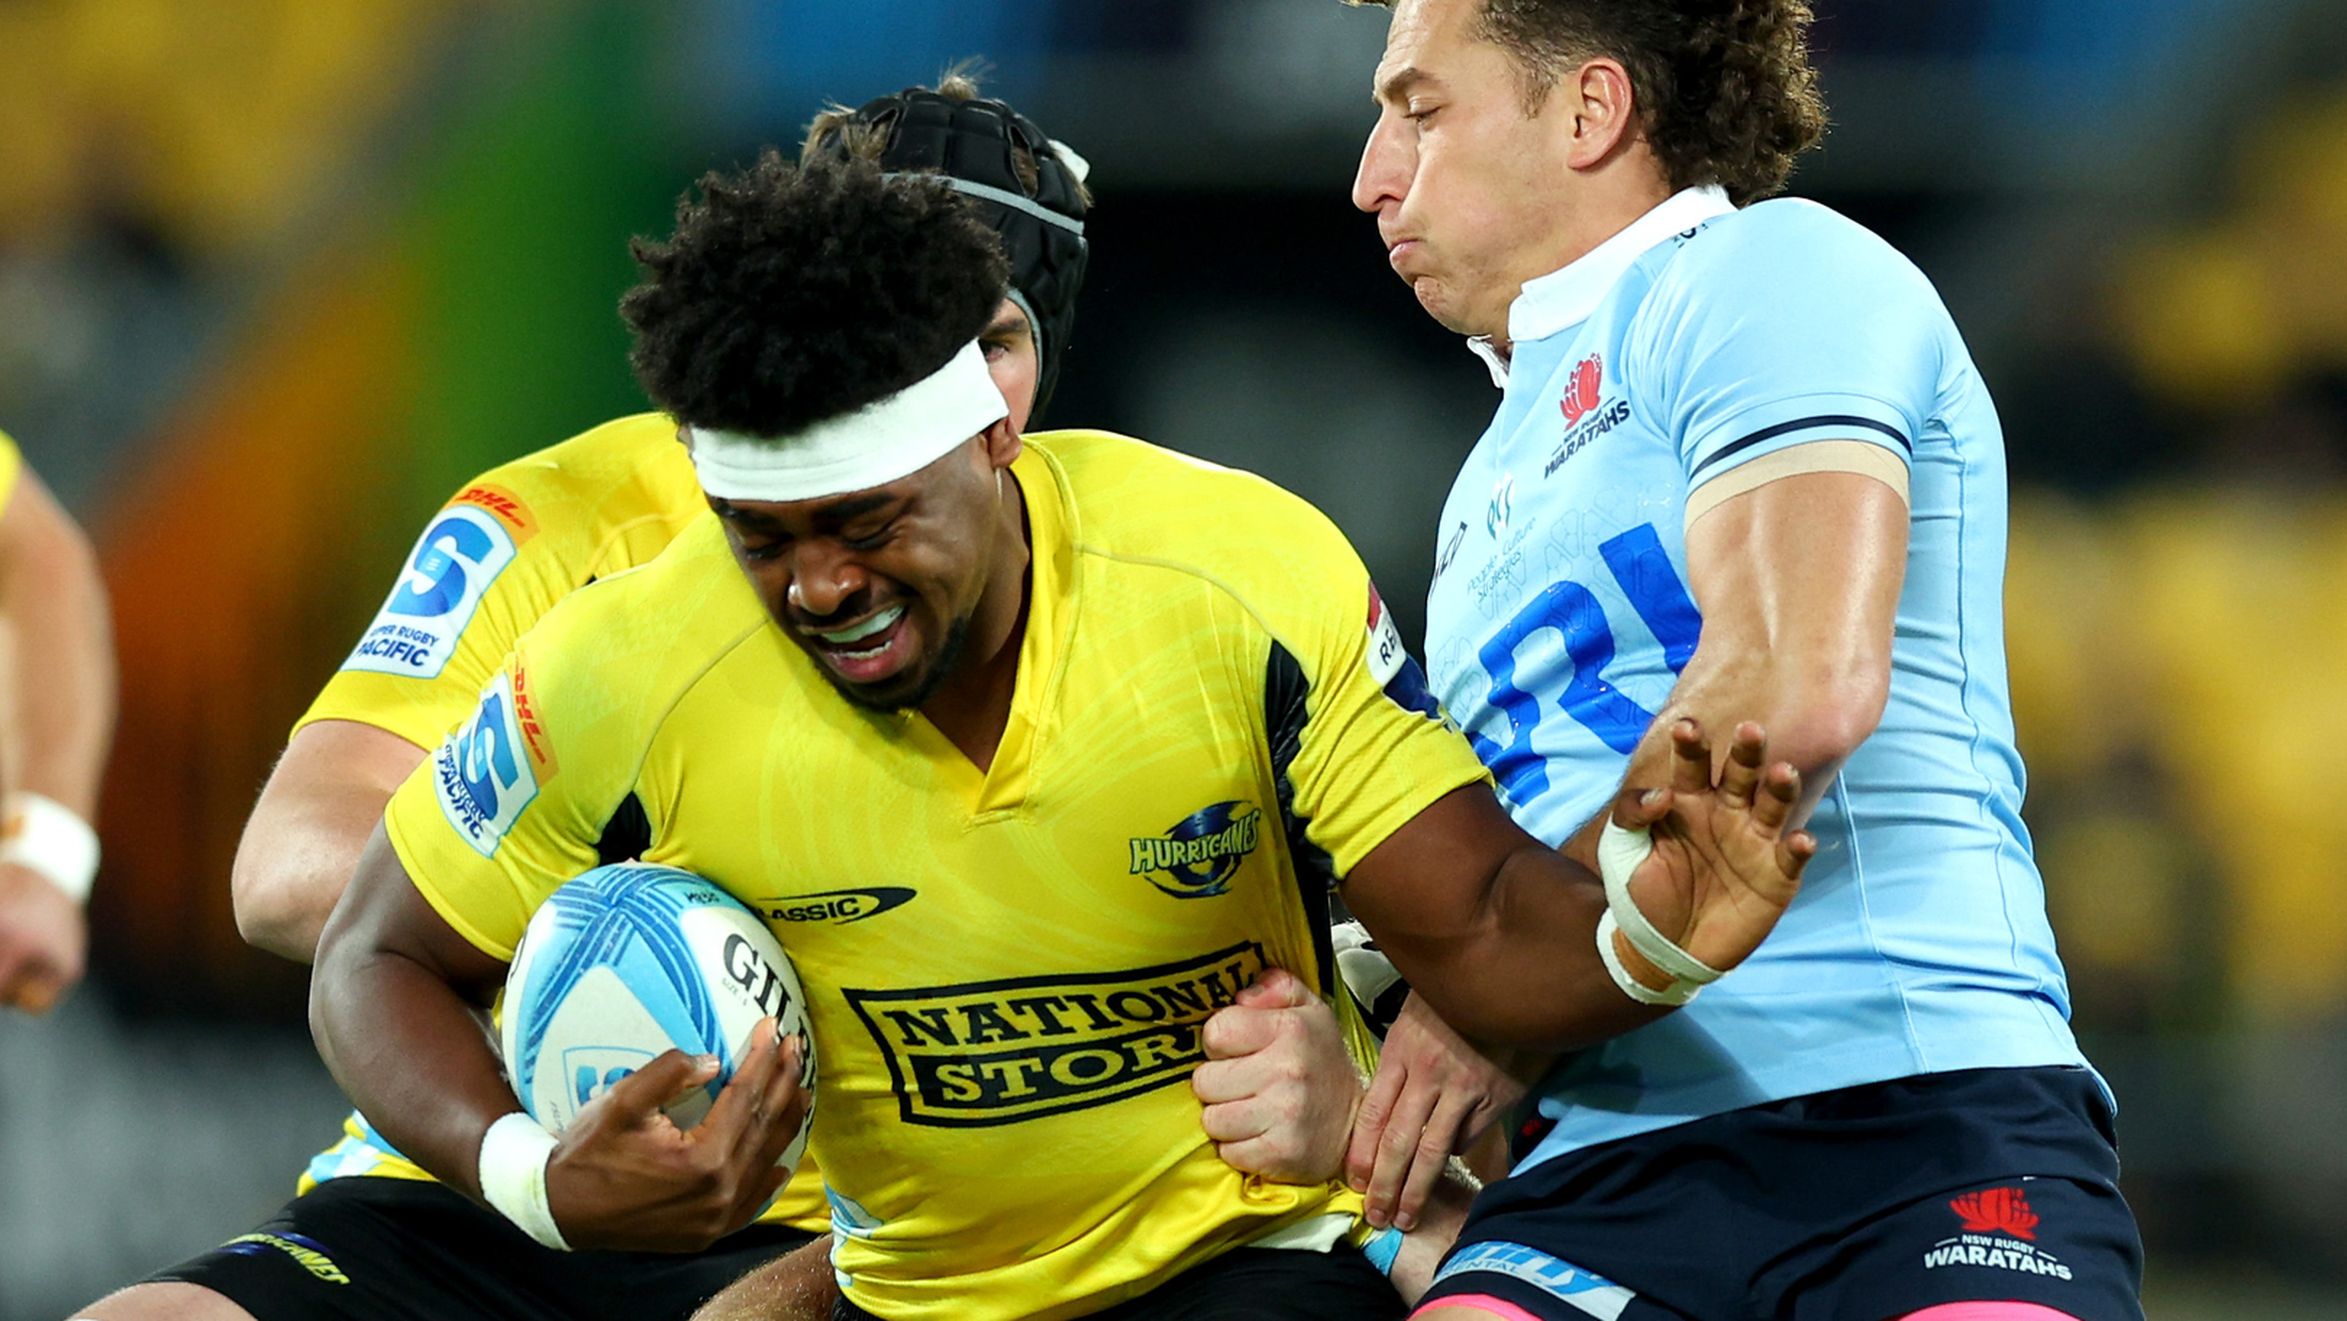 Peter Lakai of the Hurricanes is tackled during the round 11 Super Rugby Pacific match between Hurricanes and NSW Waratahs.